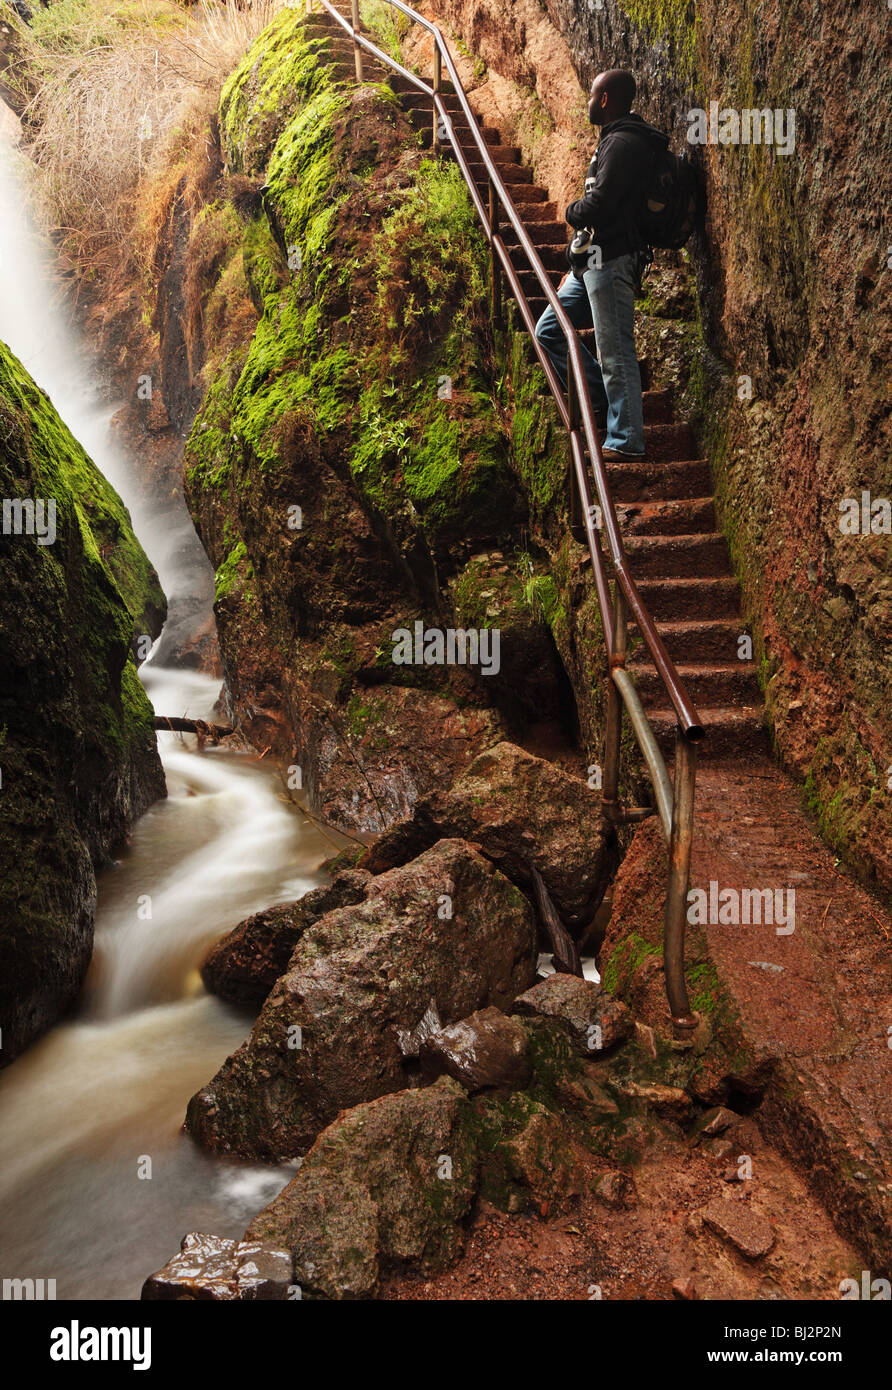 Hiker looks at mist and stream amidst rocks covered in vibrant green moss Stock Photo